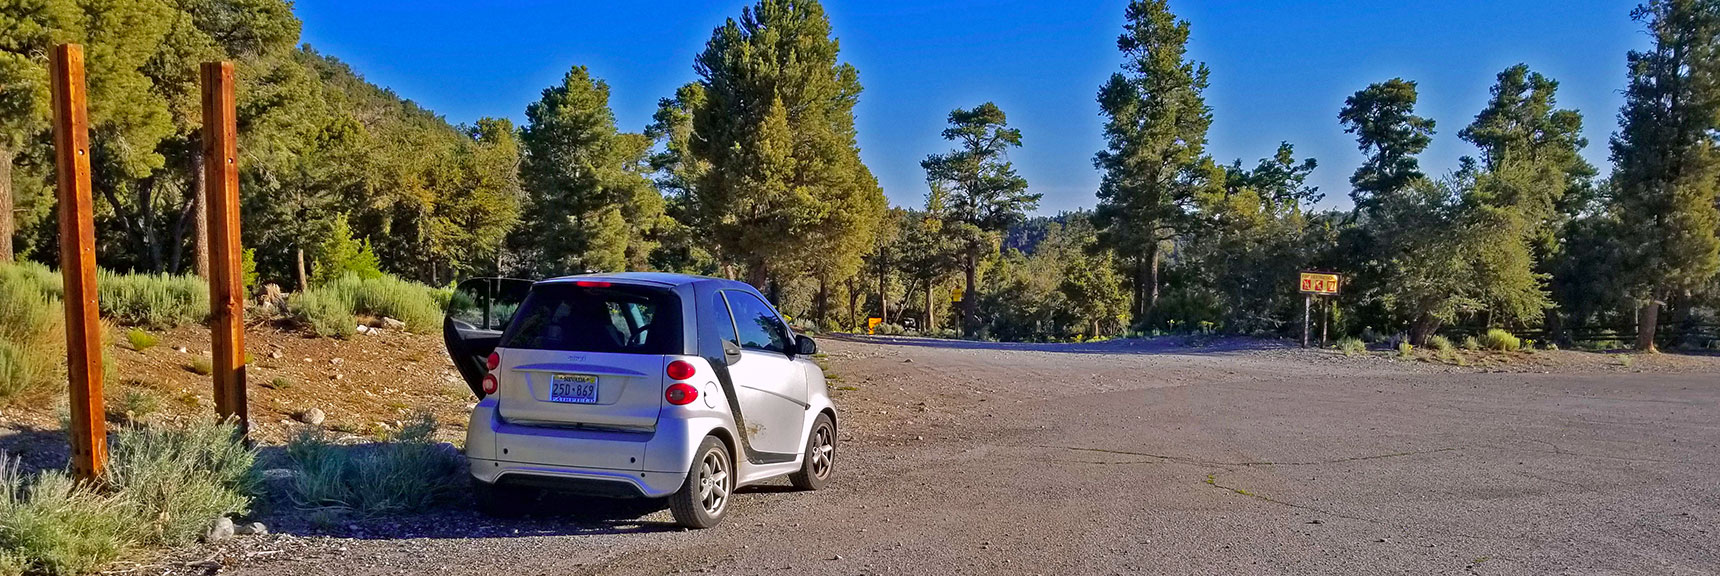 The Beast Parked at Intersection of Lee Canyon Rd and Macks Canyon Rd Starting Point | Macks Peak | Mt Charleston Wilderness | Spring Mountains, Nevada